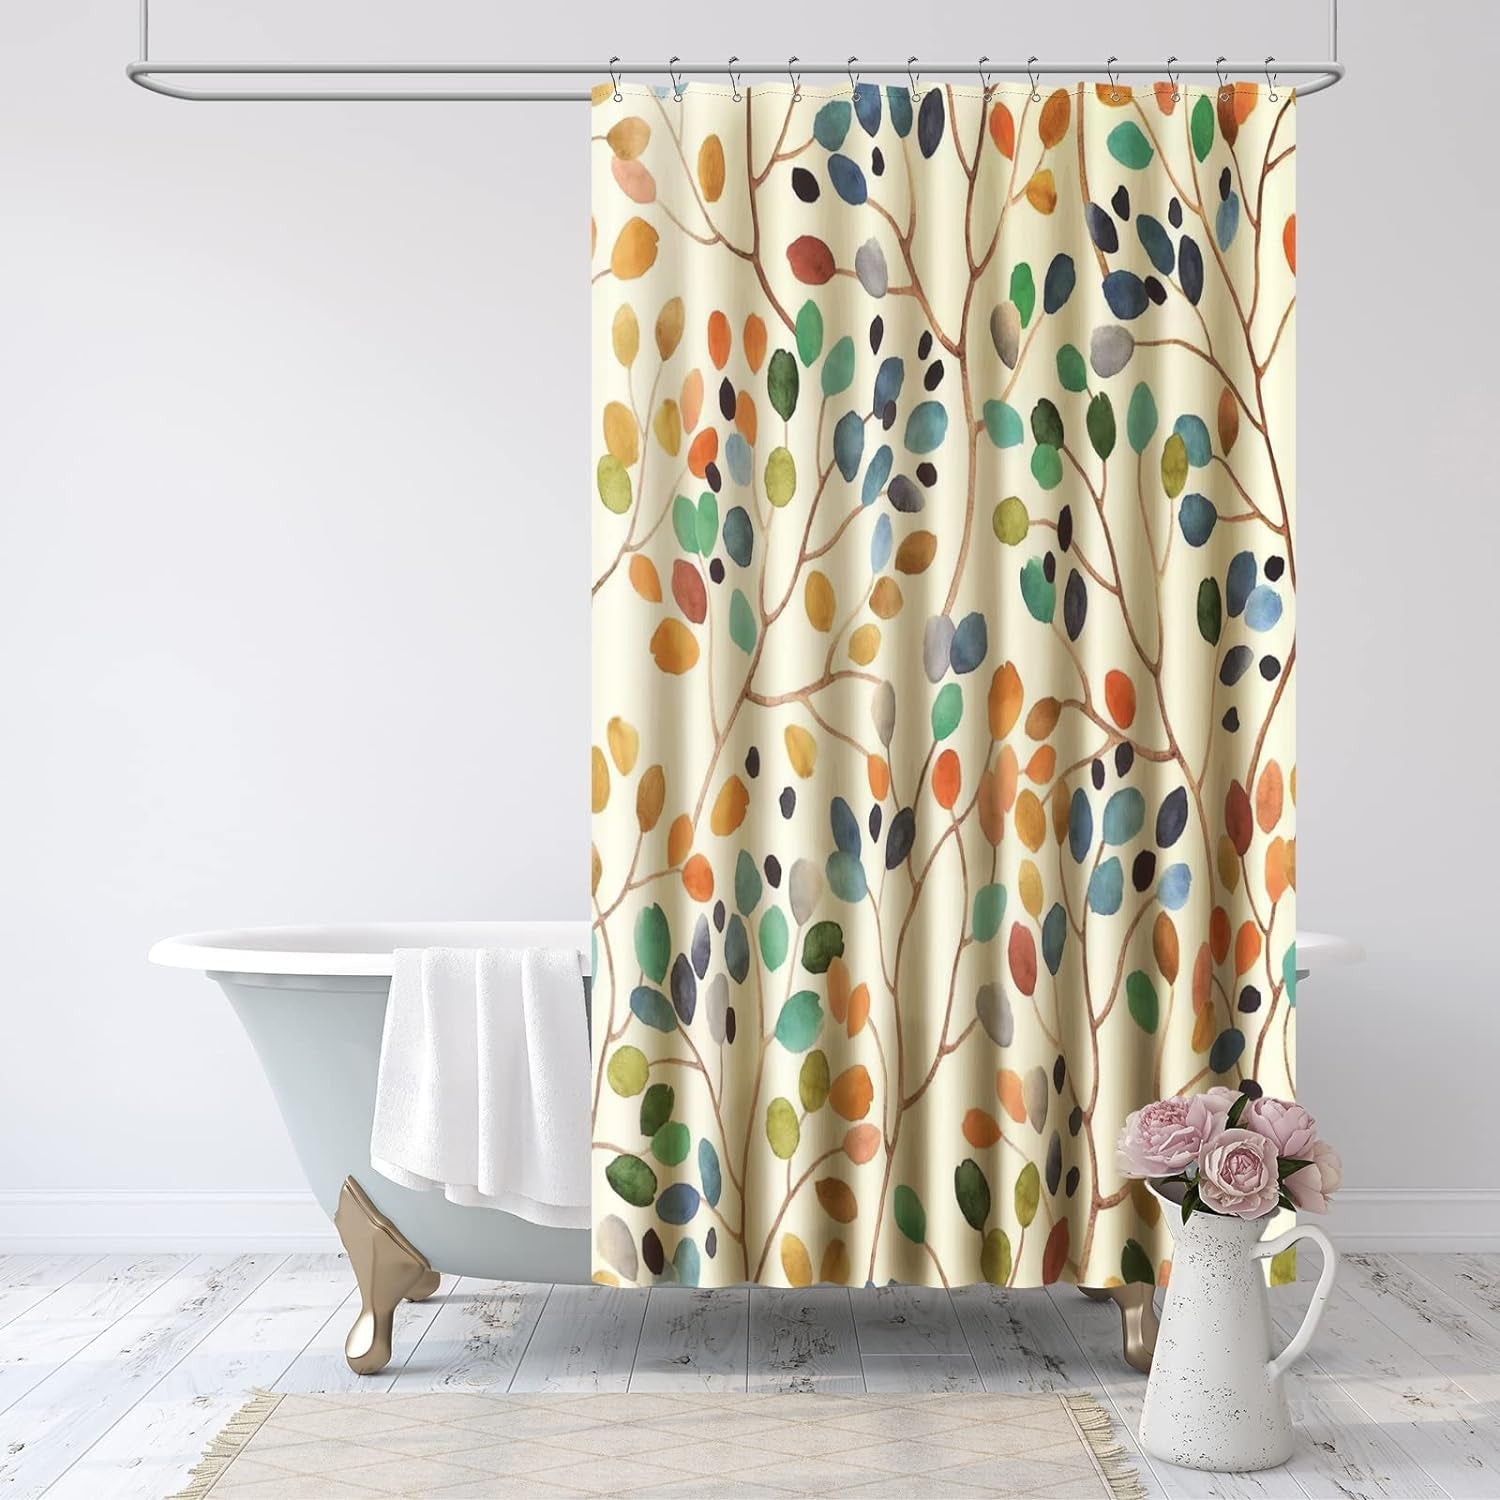 Floral Shower Curtain for Bathroom, Colorful Leaves Curtain Bathroom Decoration, Shower Curtain Set with Curtain Hooks